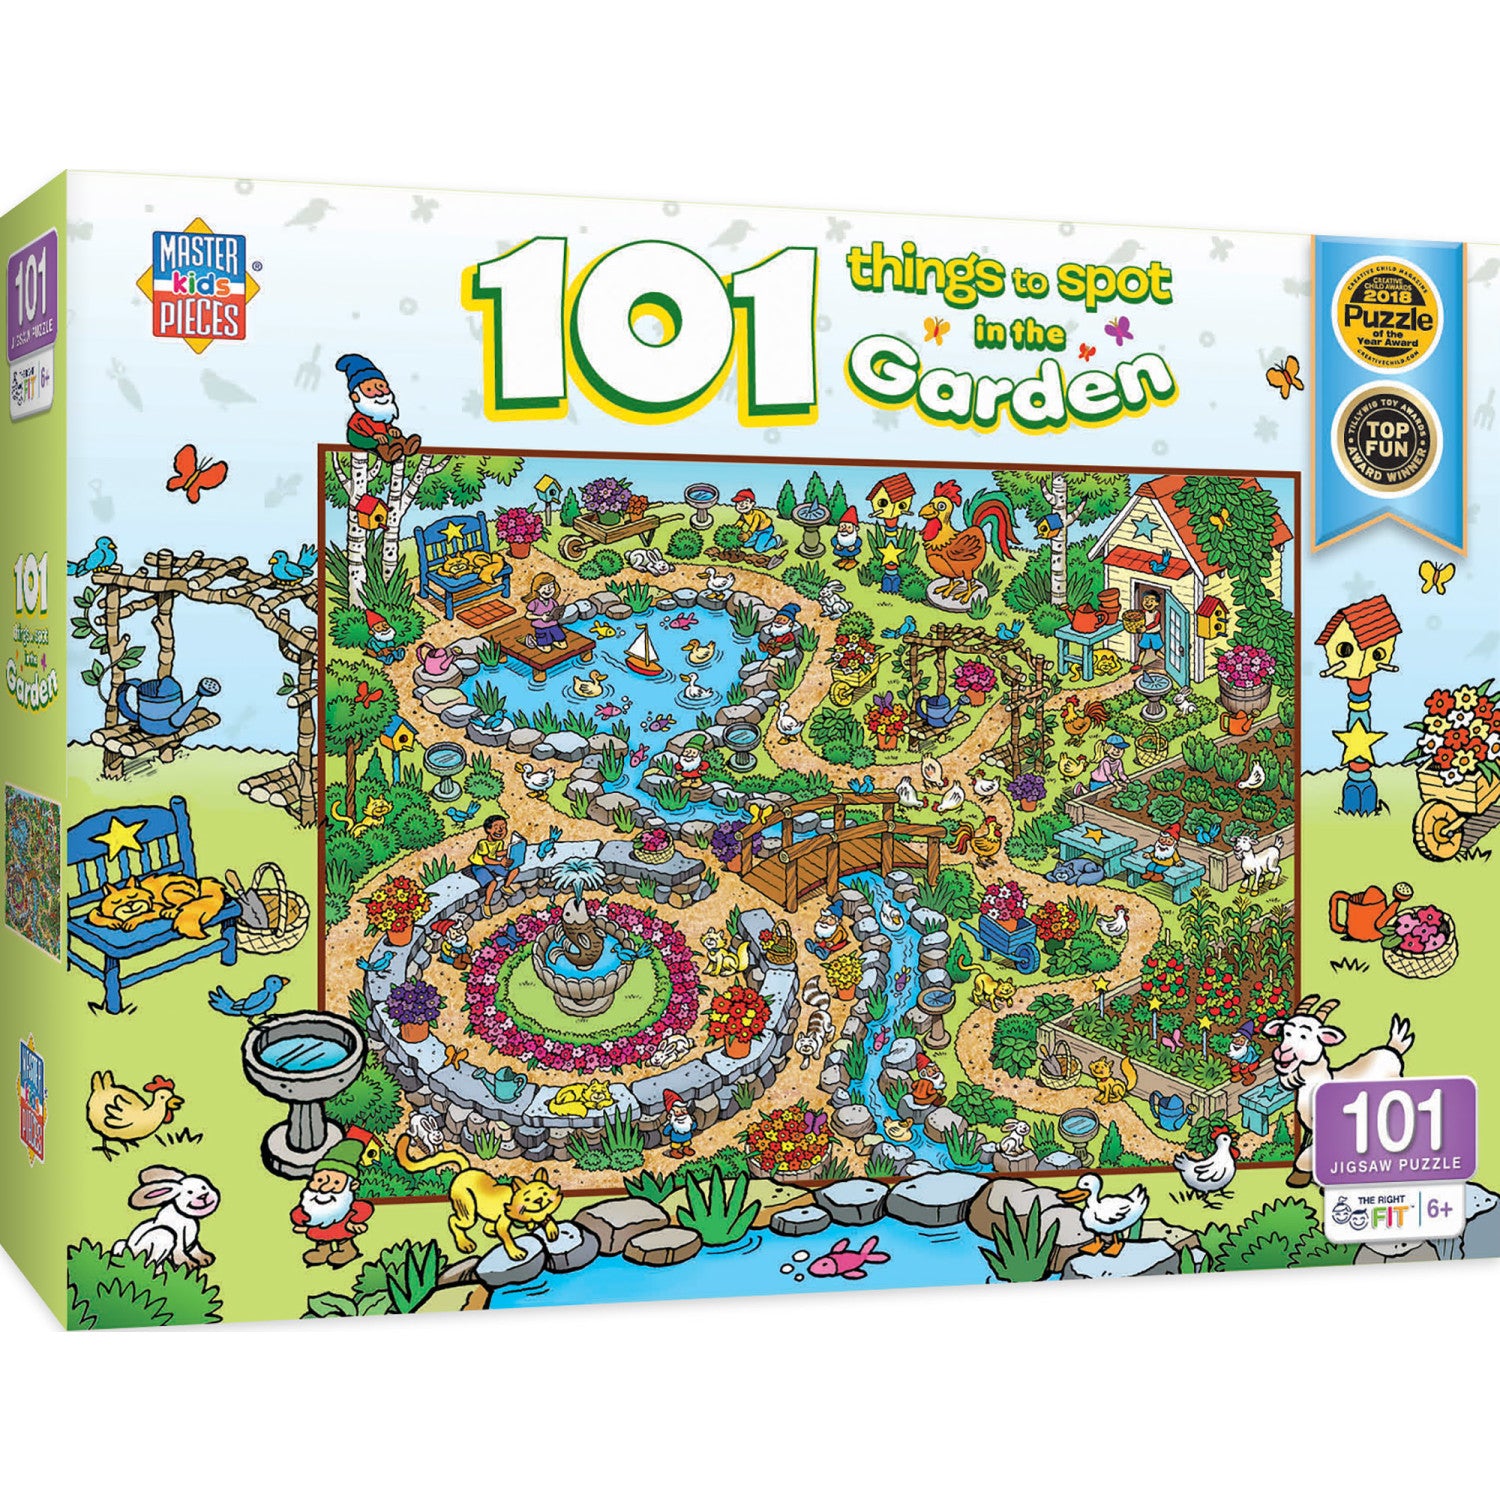 101 Things to Spot in the Garden - 101 Piece Puzzle